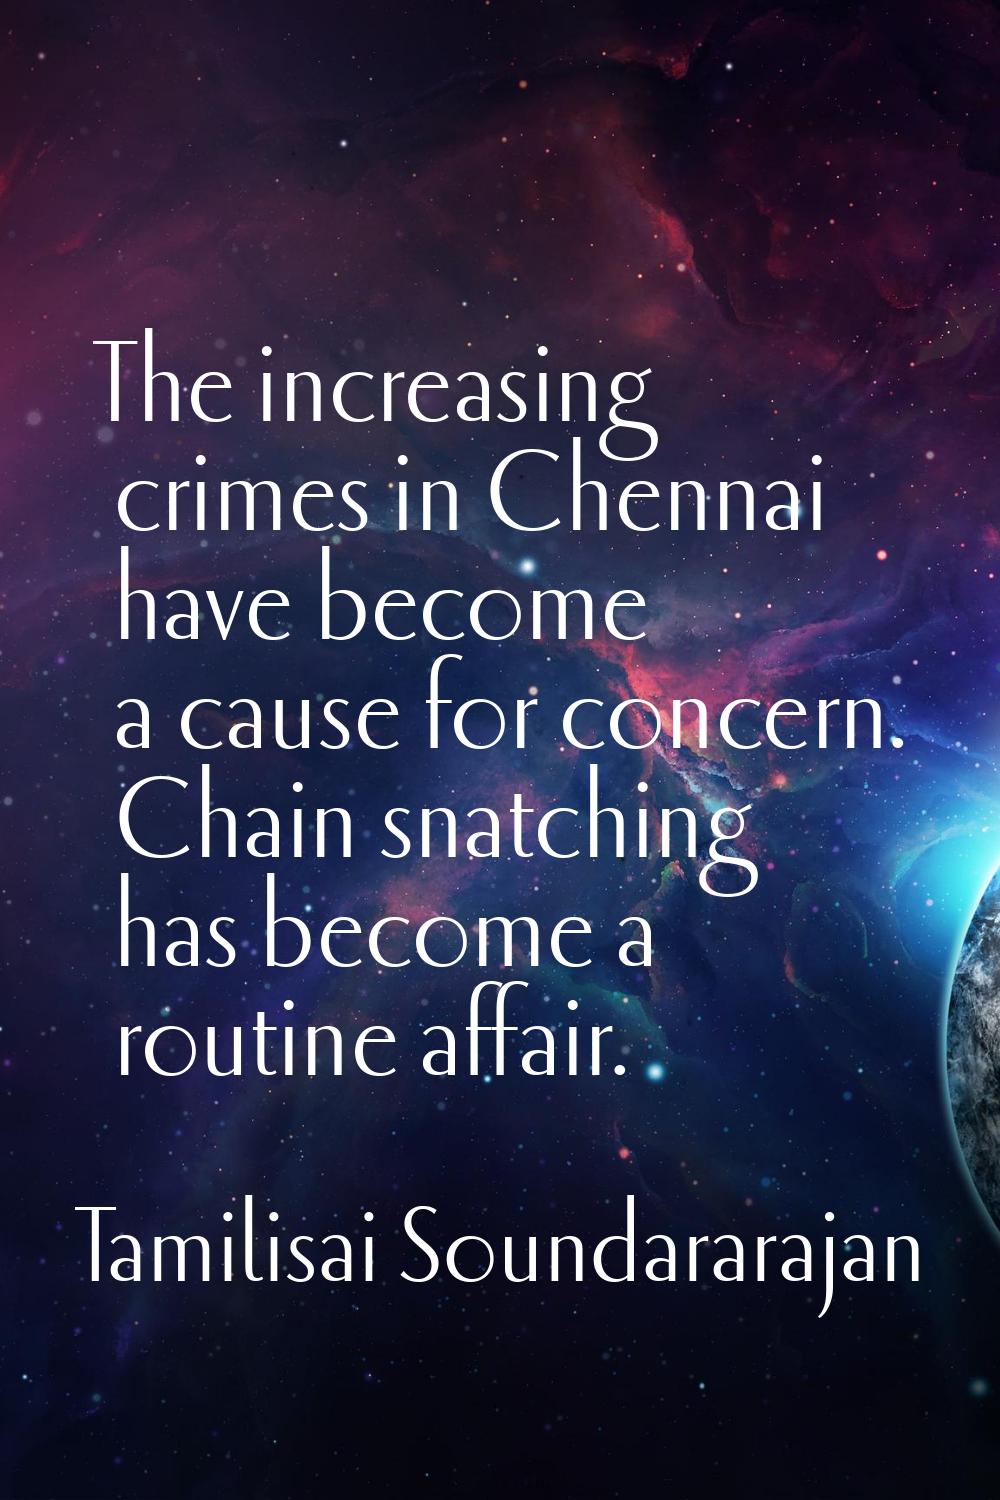 The increasing crimes in Chennai have become a cause for concern. Chain snatching has become a rout